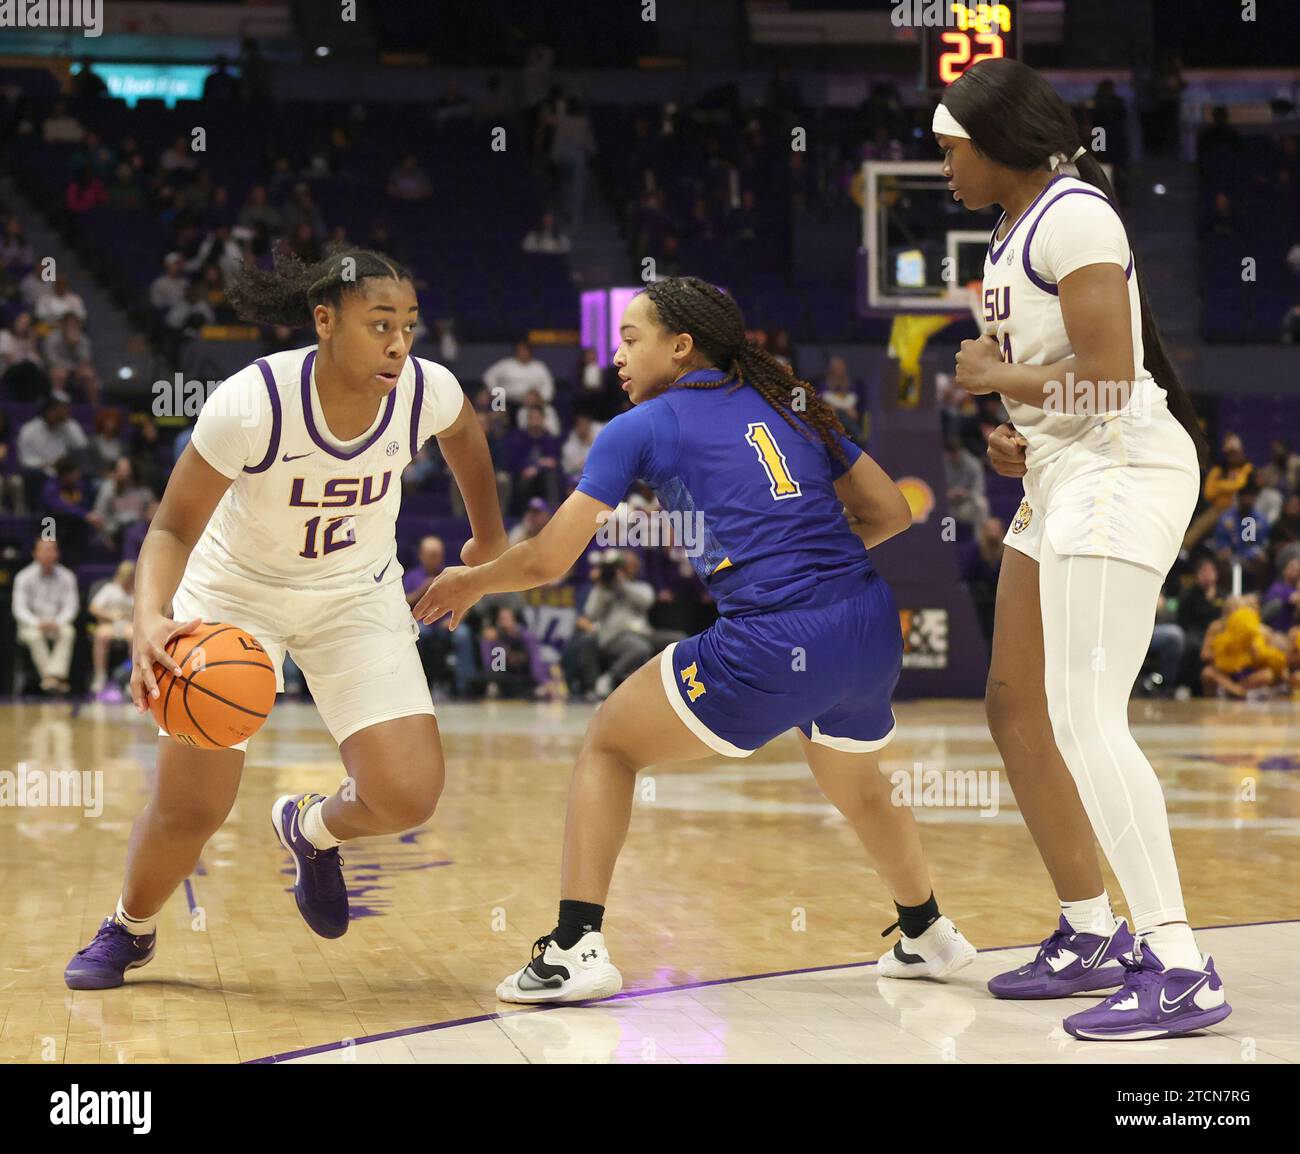 Baton Rouge, USA. 12th Dec, 2023. LSU Lady Tigers guard Mikaylah Williams (12) tries to make a crossover dribble against McNeese Cowgirls guard Azjah Reeves (1) while LSU Lady Tigers guard Aneesah Morrow (24) sets up for a pick during a women's college basketball game at Pete Maravich Assembly Center in Baton Rouge, Louisiana on Tuesday, December 12, 2023. (Photo by Peter G. Forest/Sipa USA) Credit: Sipa USA/Alamy Live News Stock Photo